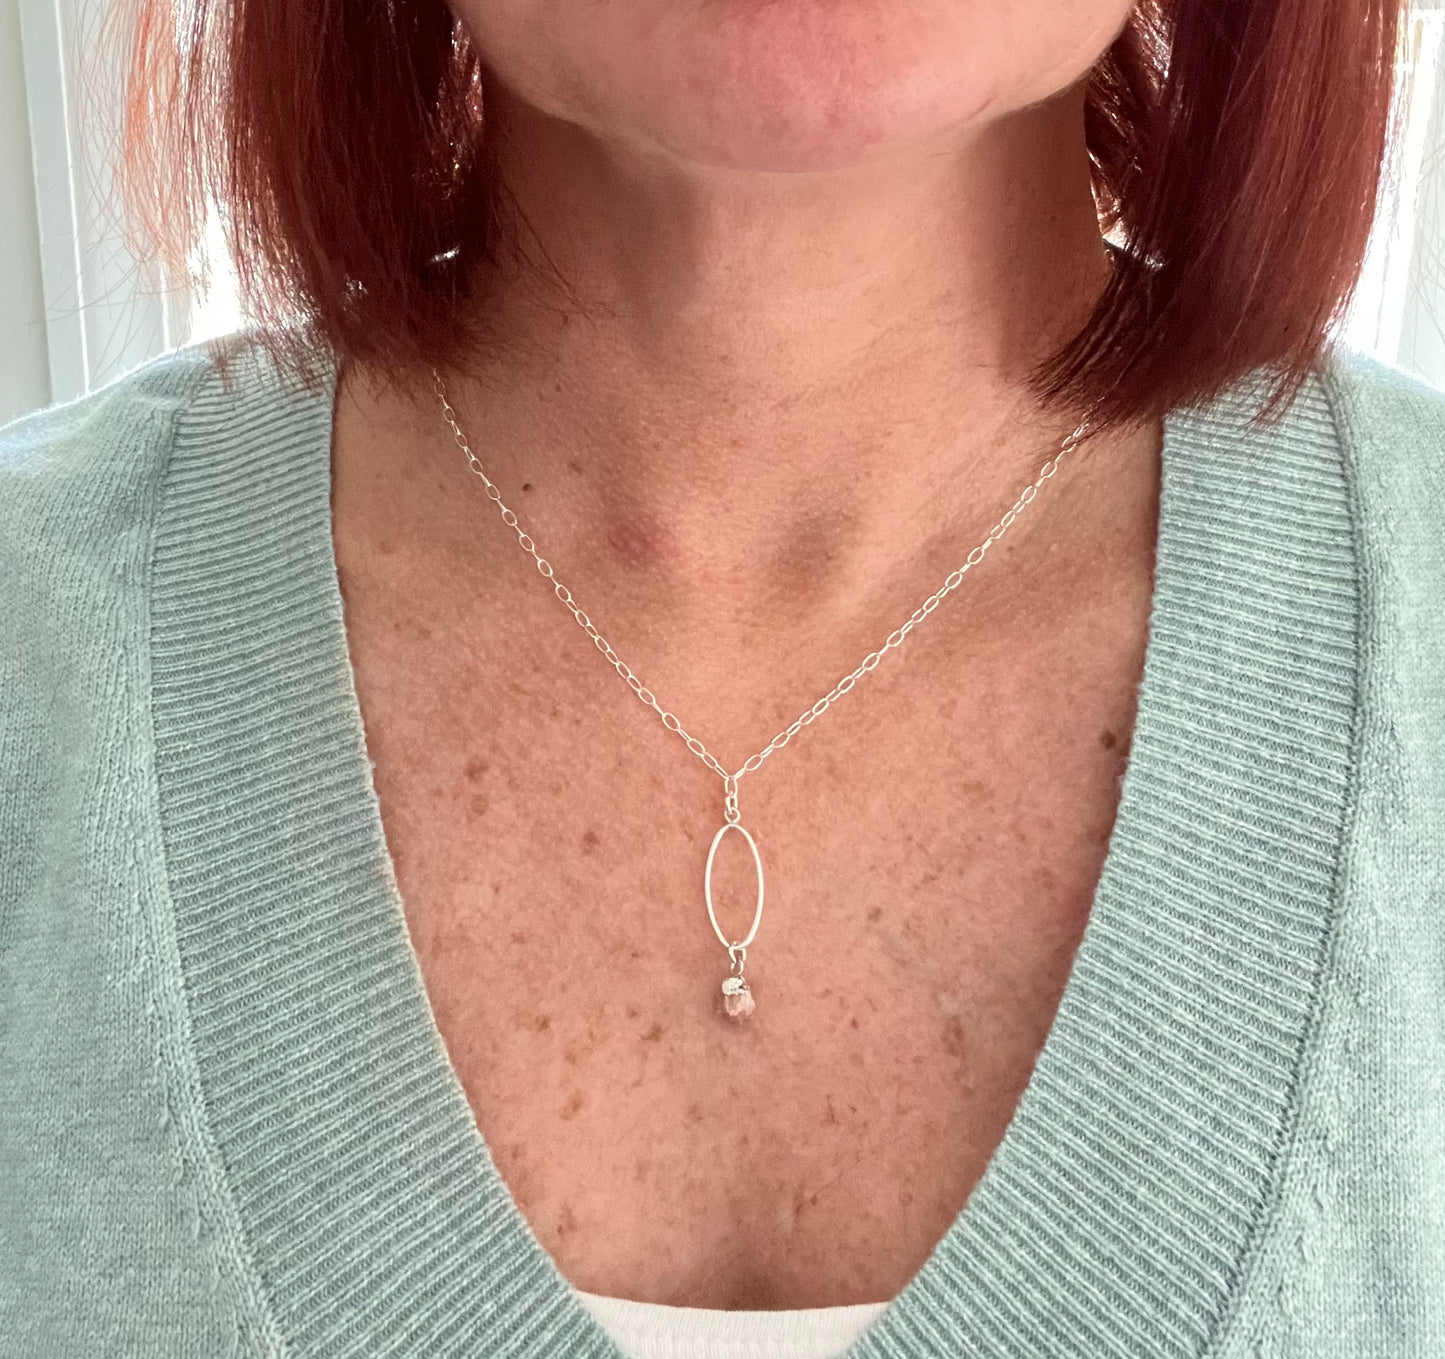 A woman wearing a sage green v neck sweater with a white tank top underneath. Her necklace is sterling silver and the pendant is a sterling long flat oval with a pink tourmaline bead hanging on the bottom.